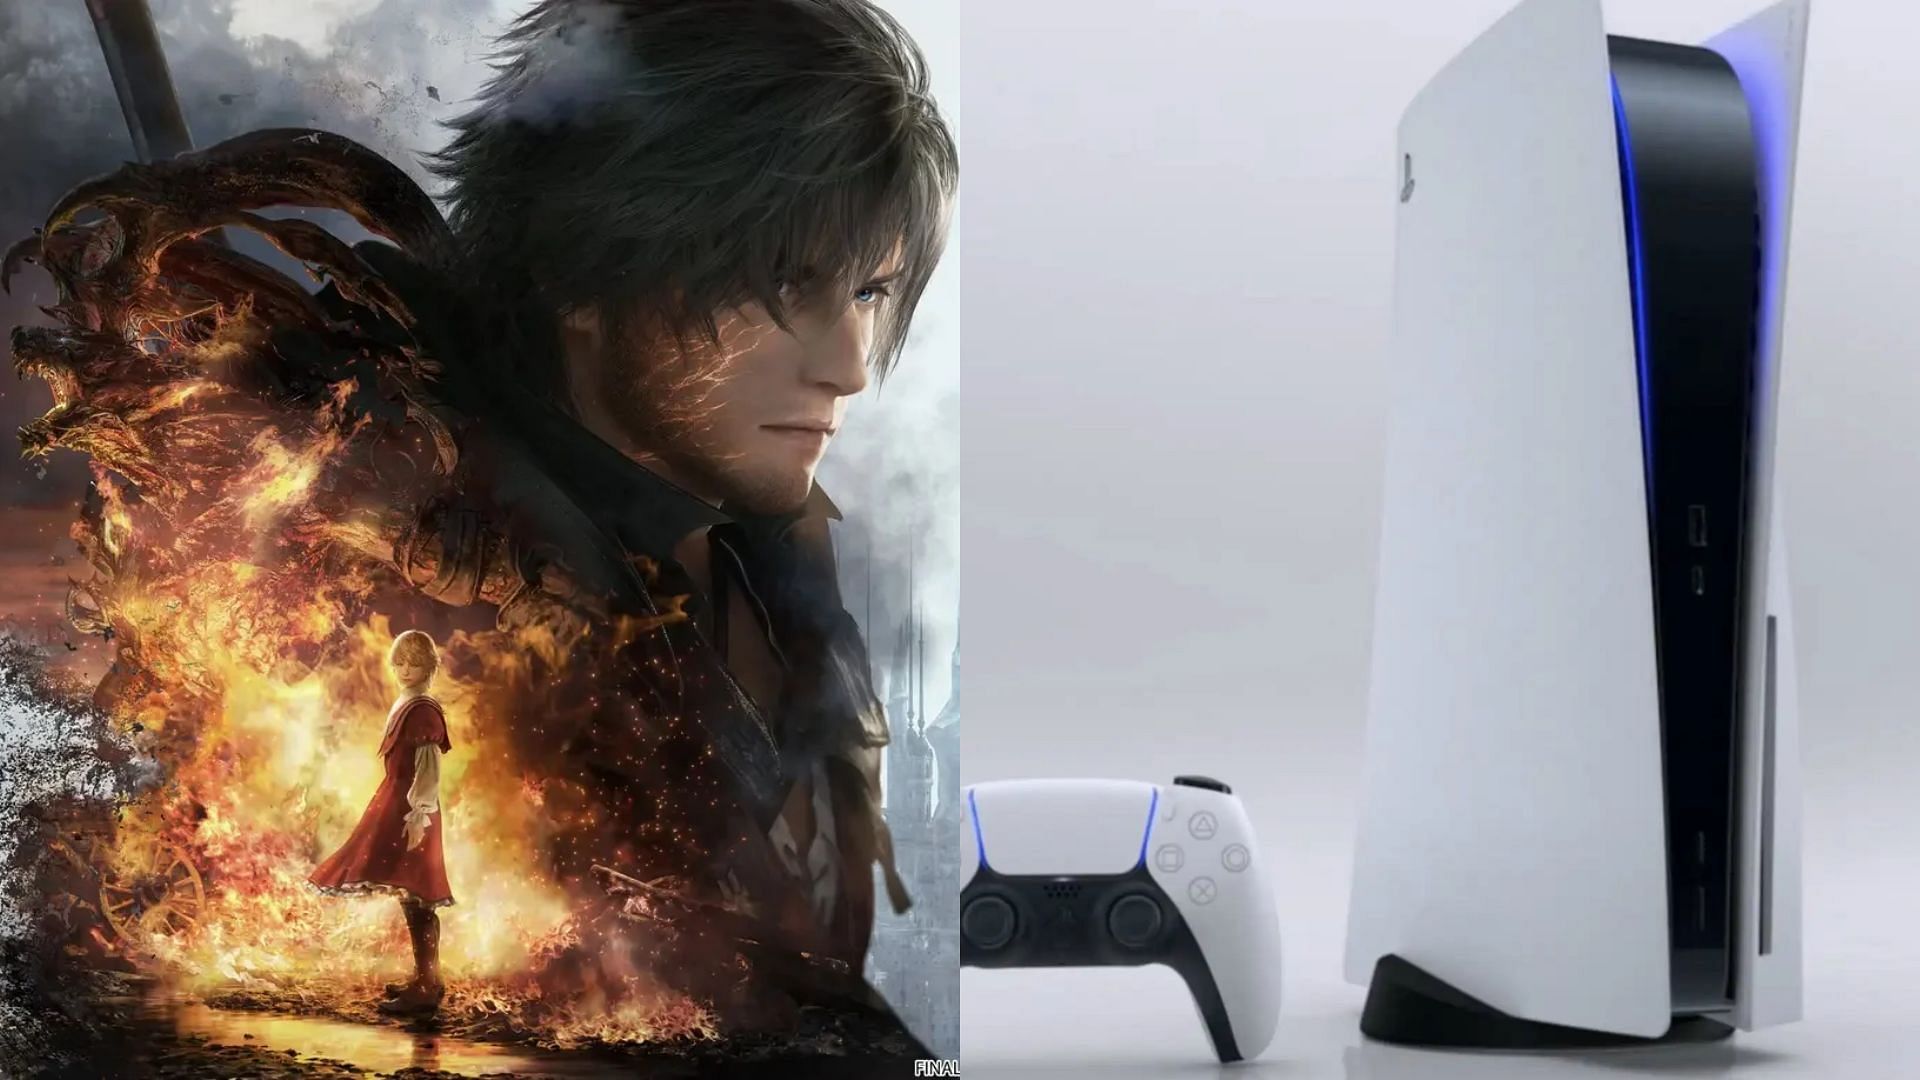 The Sony PS5 is overheating while running Final Fantasy 16 (Image via Sony and Square Enix)